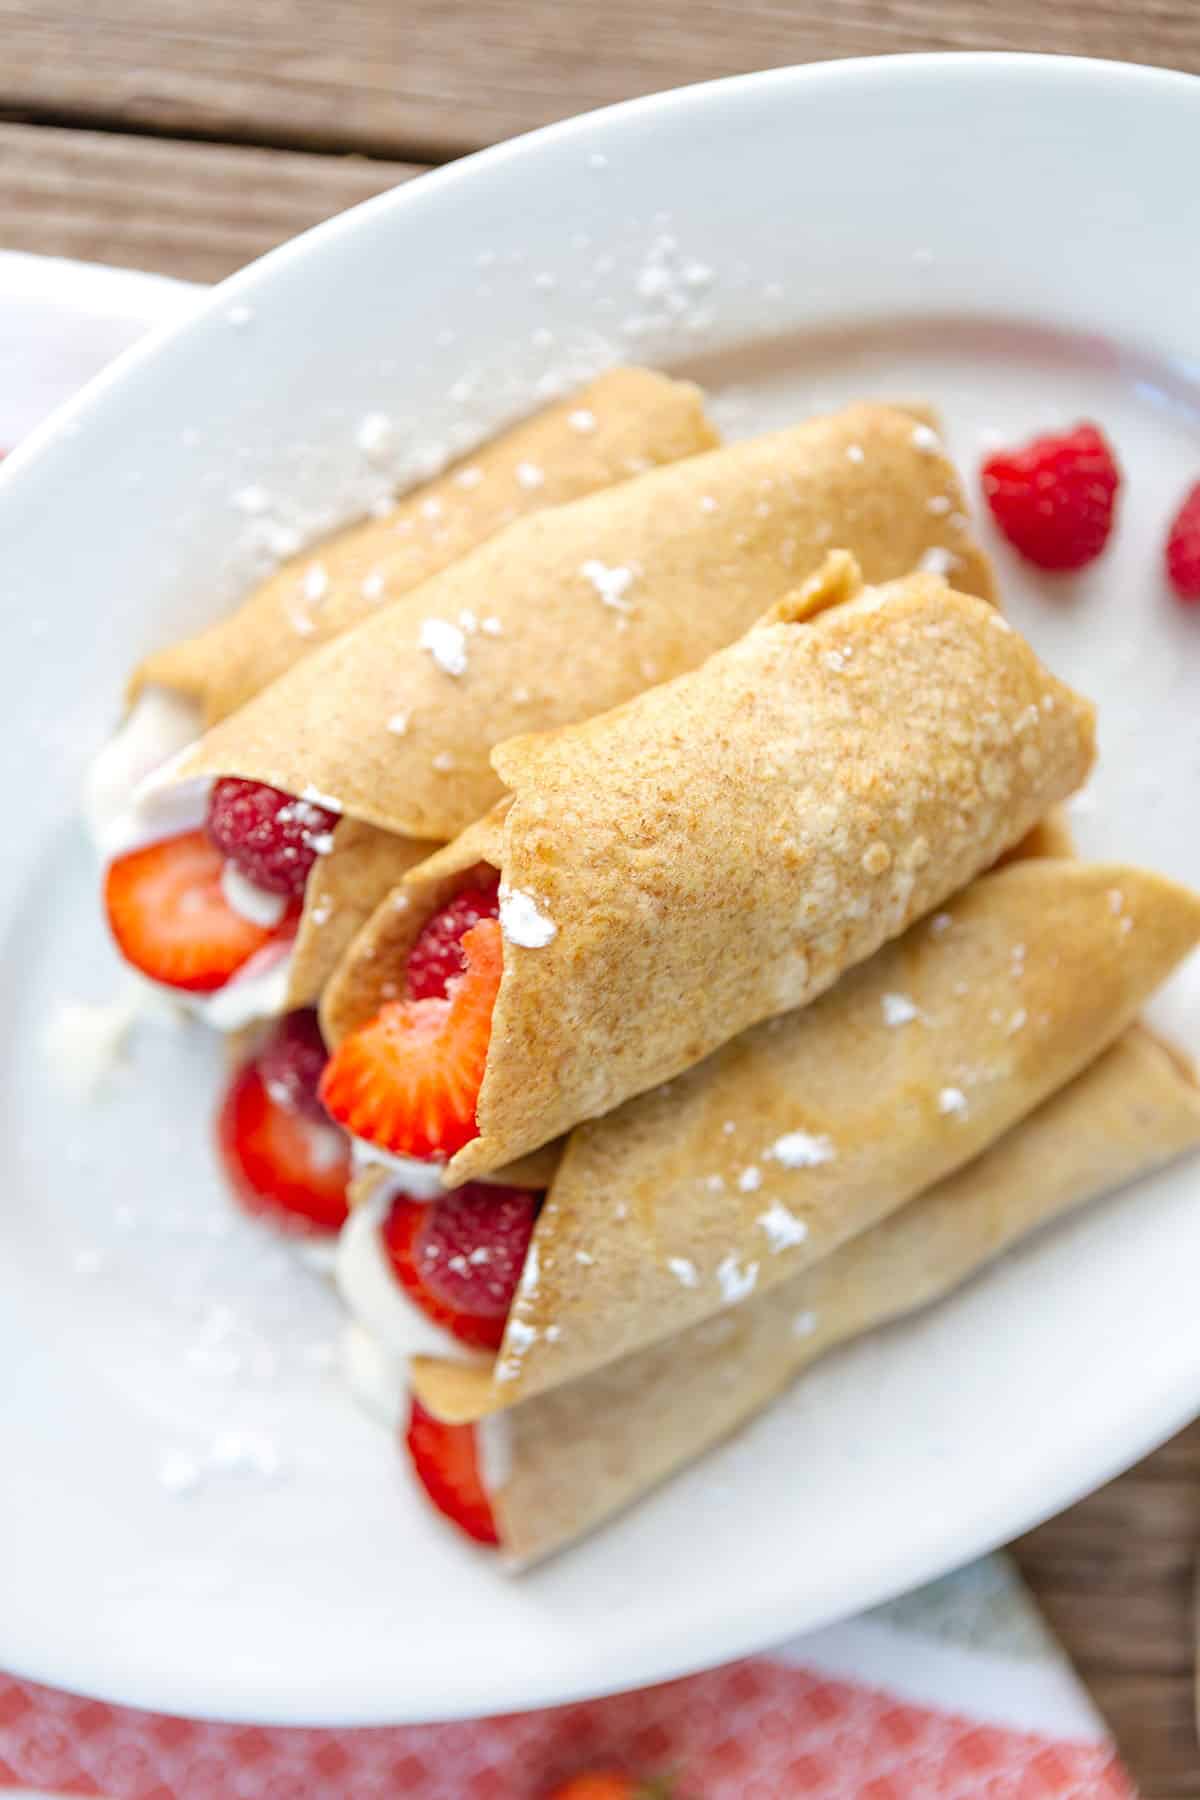 Top view of strawberry crepes filled with fresh strawberries and raspberries and a cream filling on a white plate